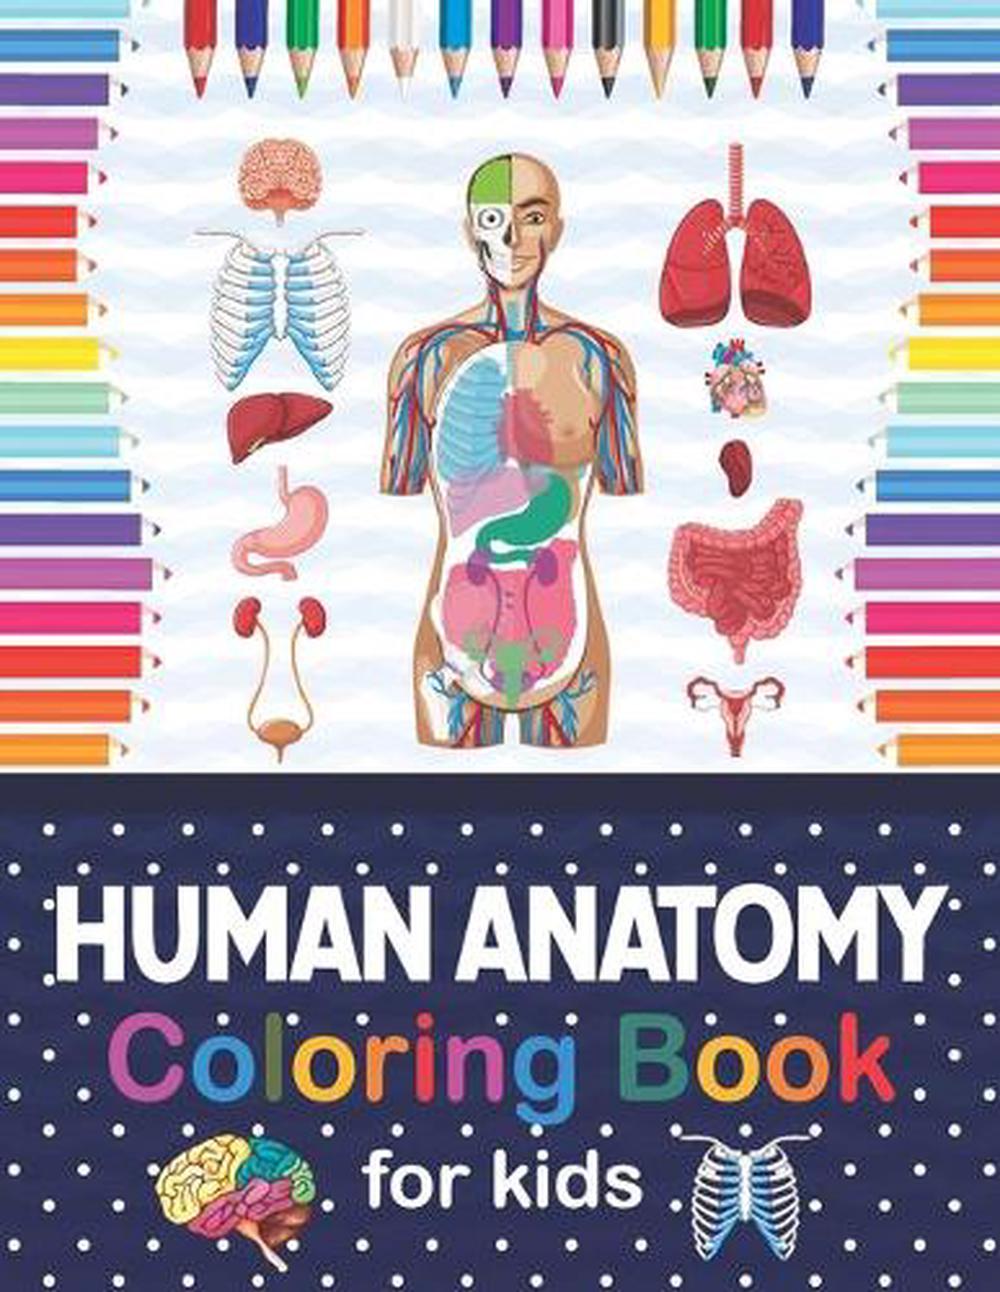 Download Human Anatomy Coloring Book For Kids By Publication Jarniczell Publication Paperback 9798566851624 Buy Online At Moby The Great